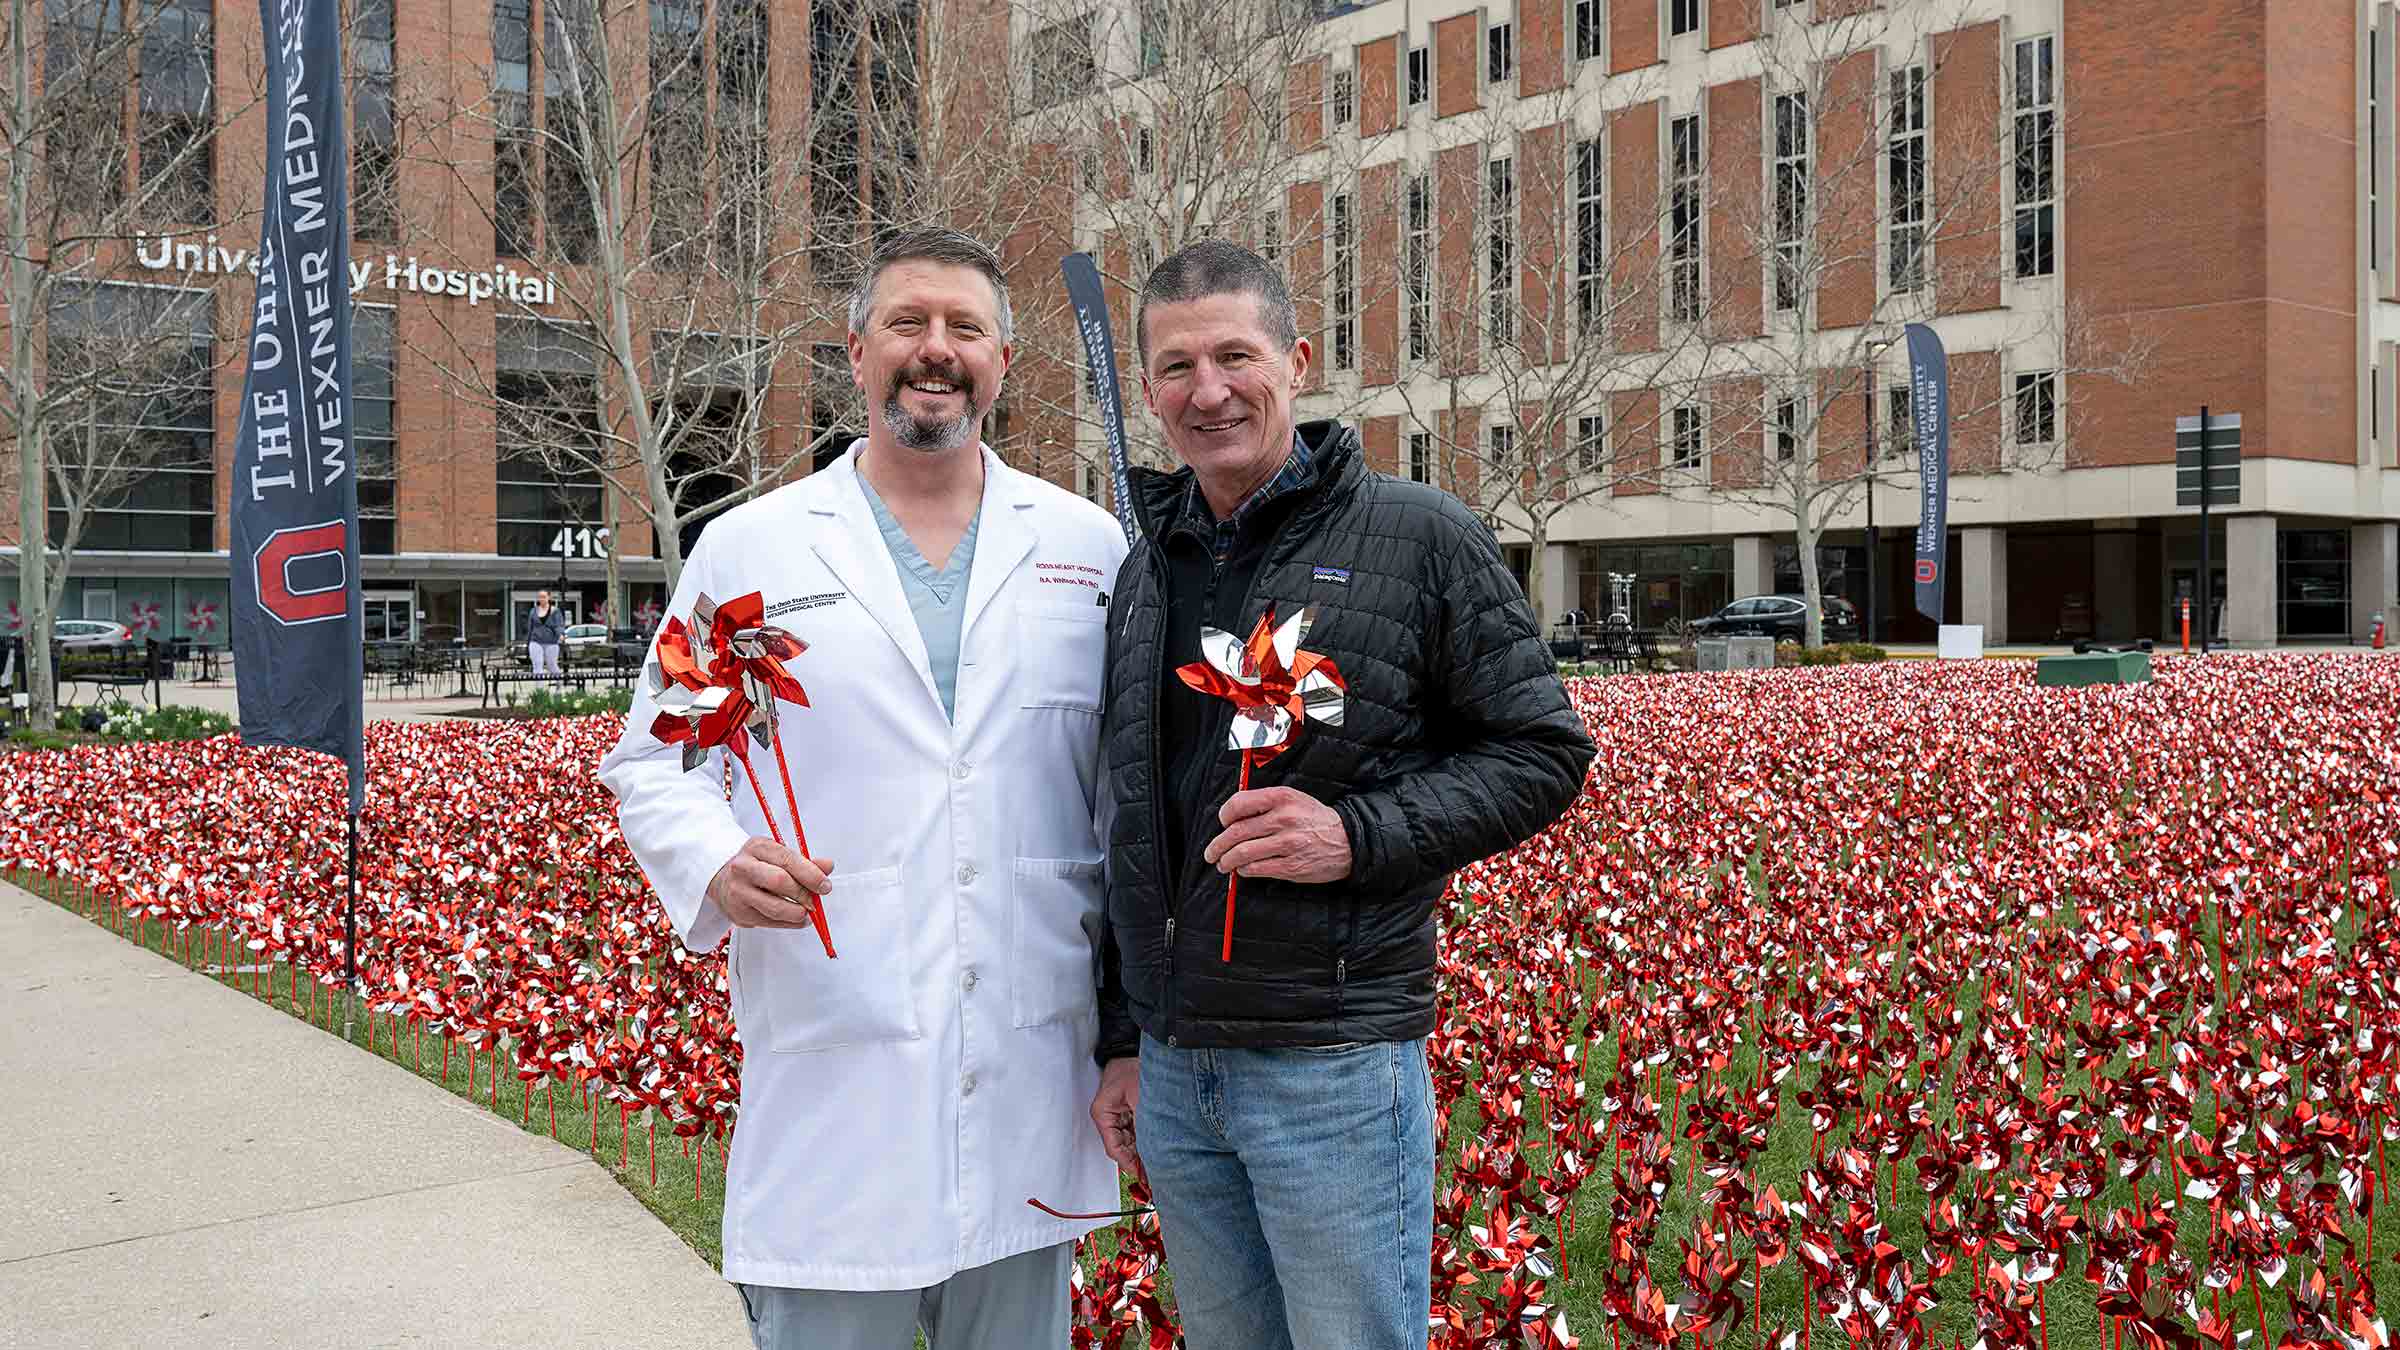 Dr. Whitson with Dr. Washburn in front of the lawn full of red pinwheels